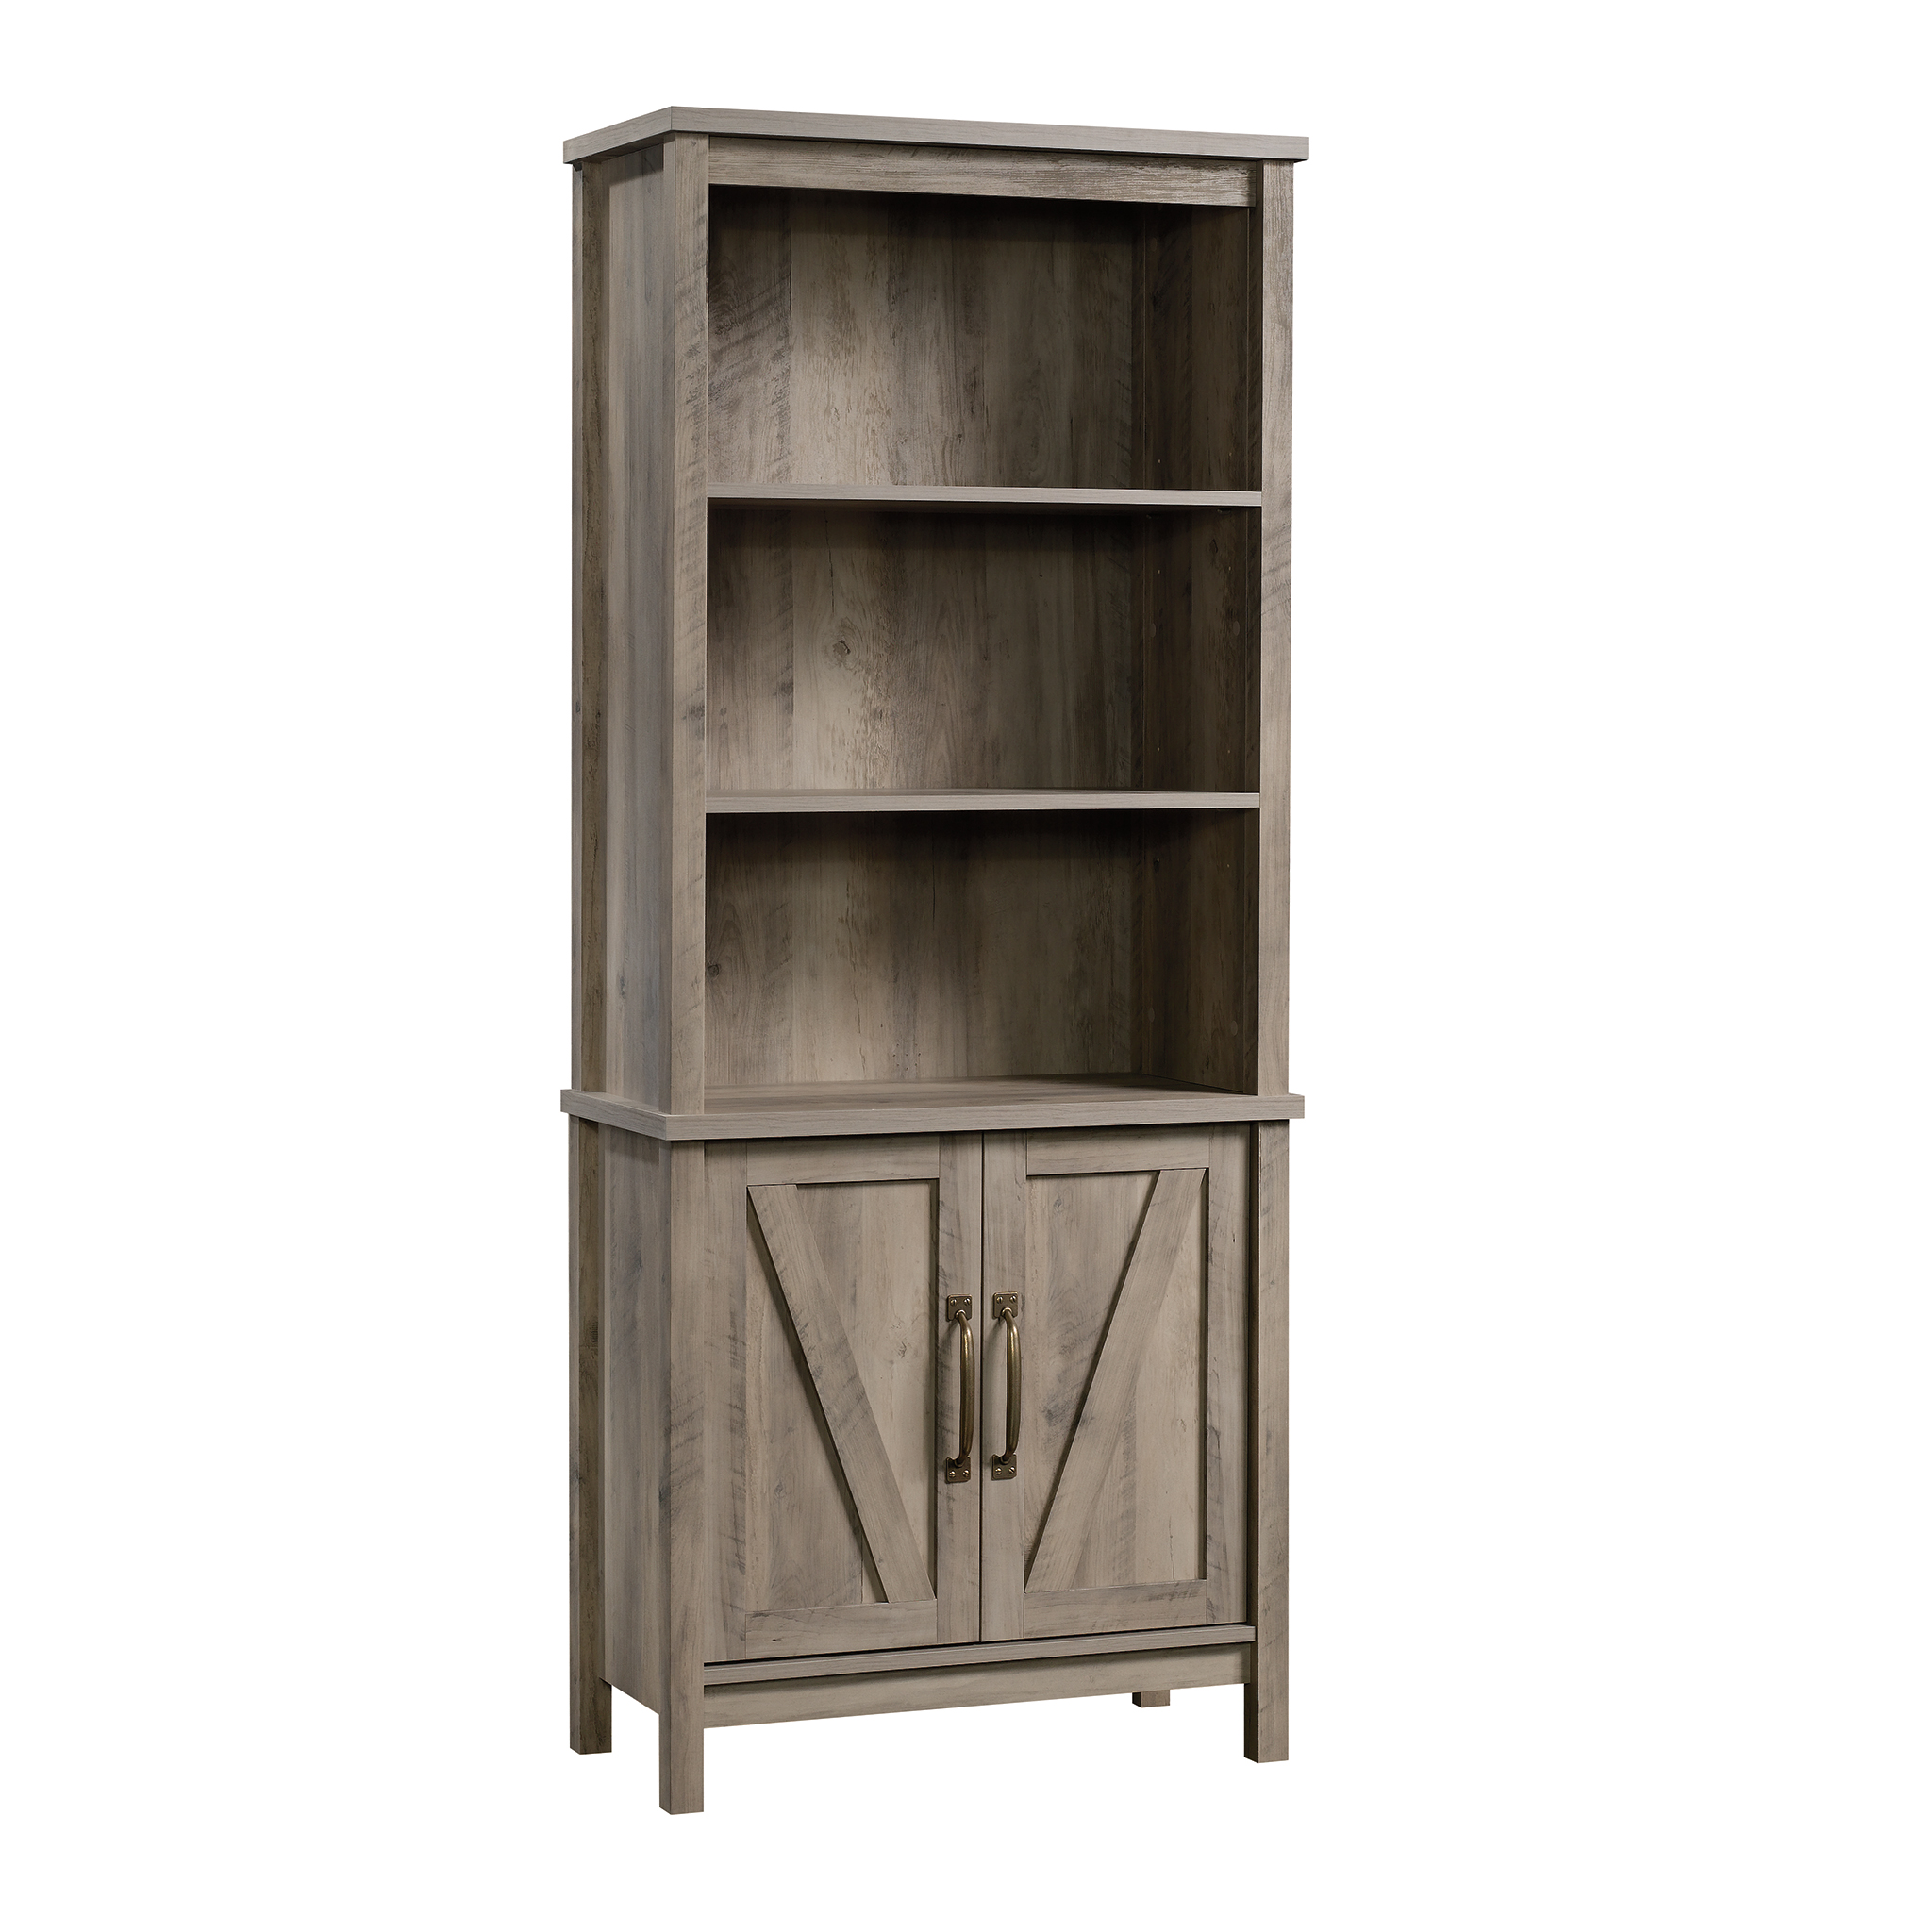 Better Homes & Gardens Modern Farmhouse 5 Shelf Library Bookcase with Doors, Rustic Gray Finish - image 2 of 16